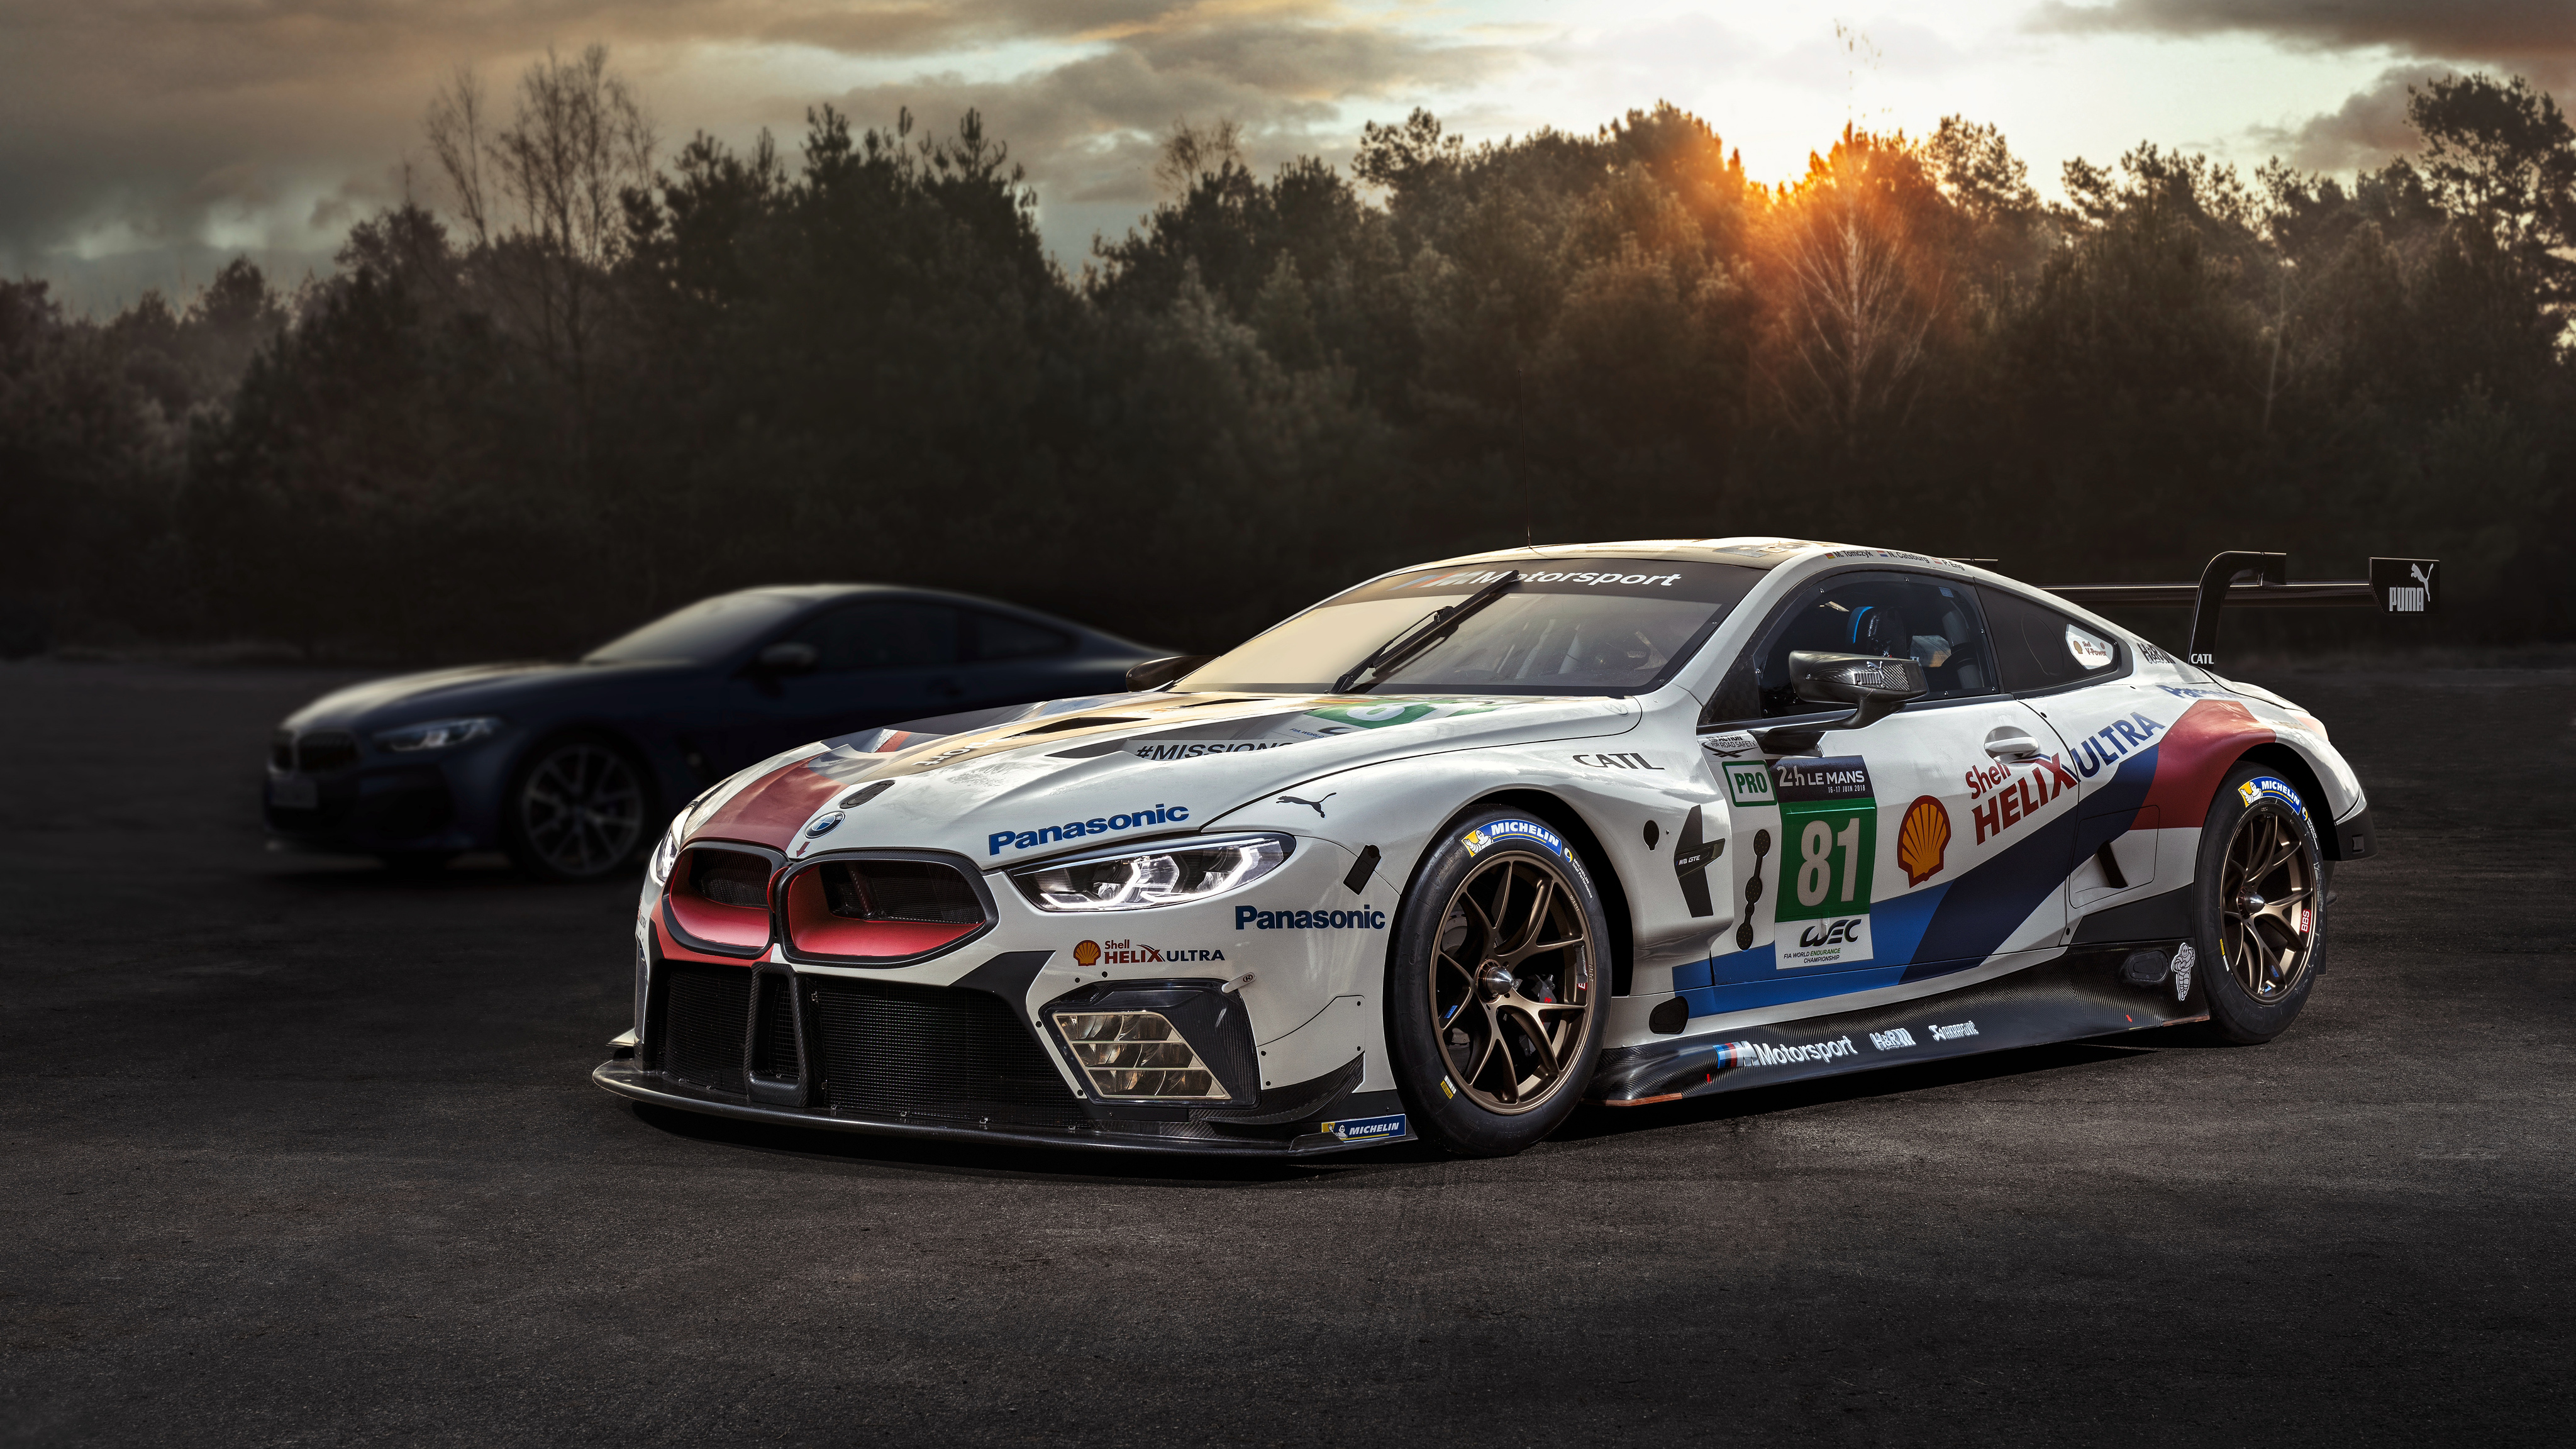 BMW M8 GTE 2018 4K Wallpapers